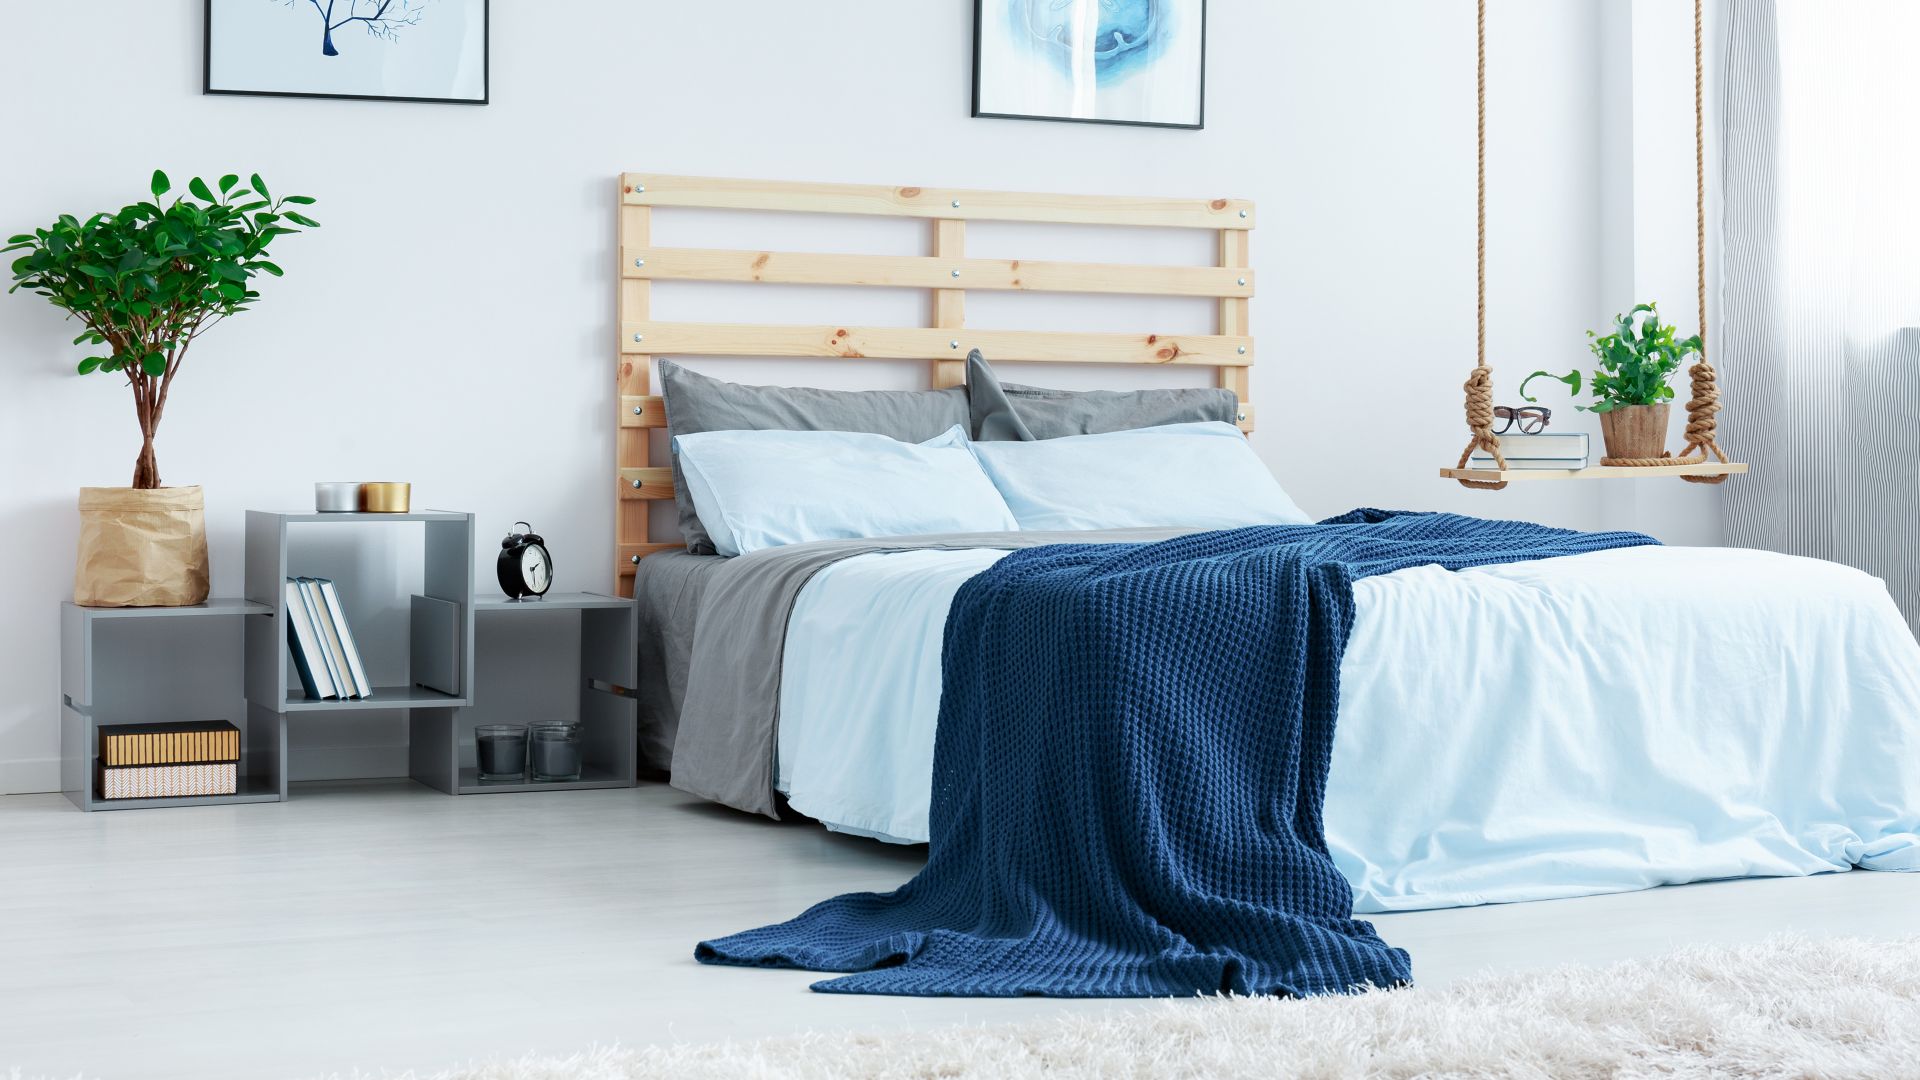 Where to use product guide for your bedroom